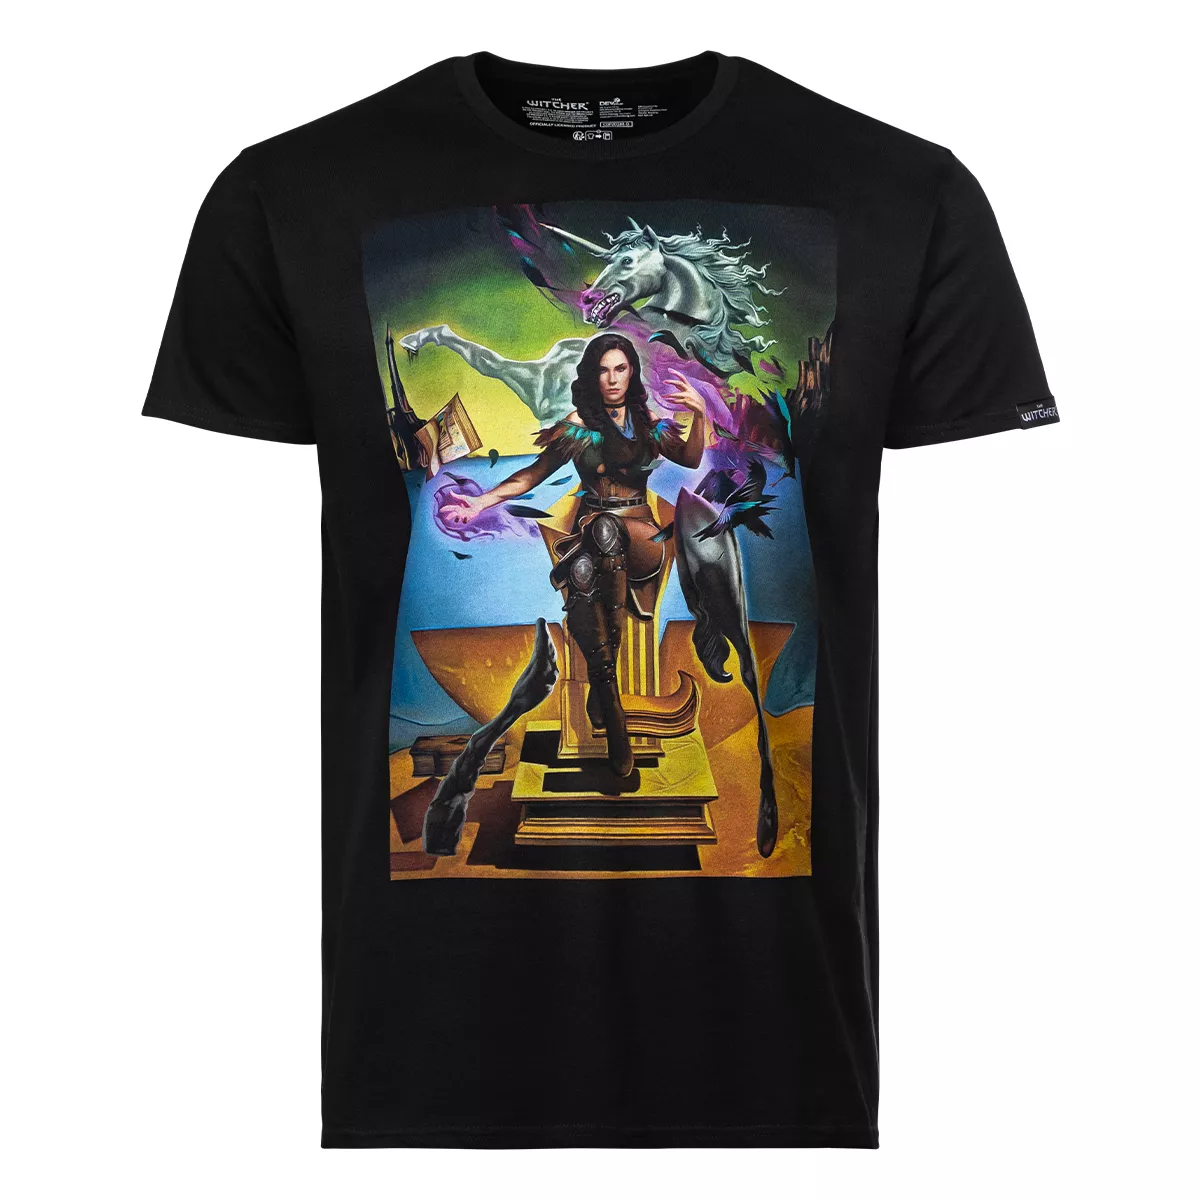 The Witcher T-Shirt "Yennefer Dalí" Cover